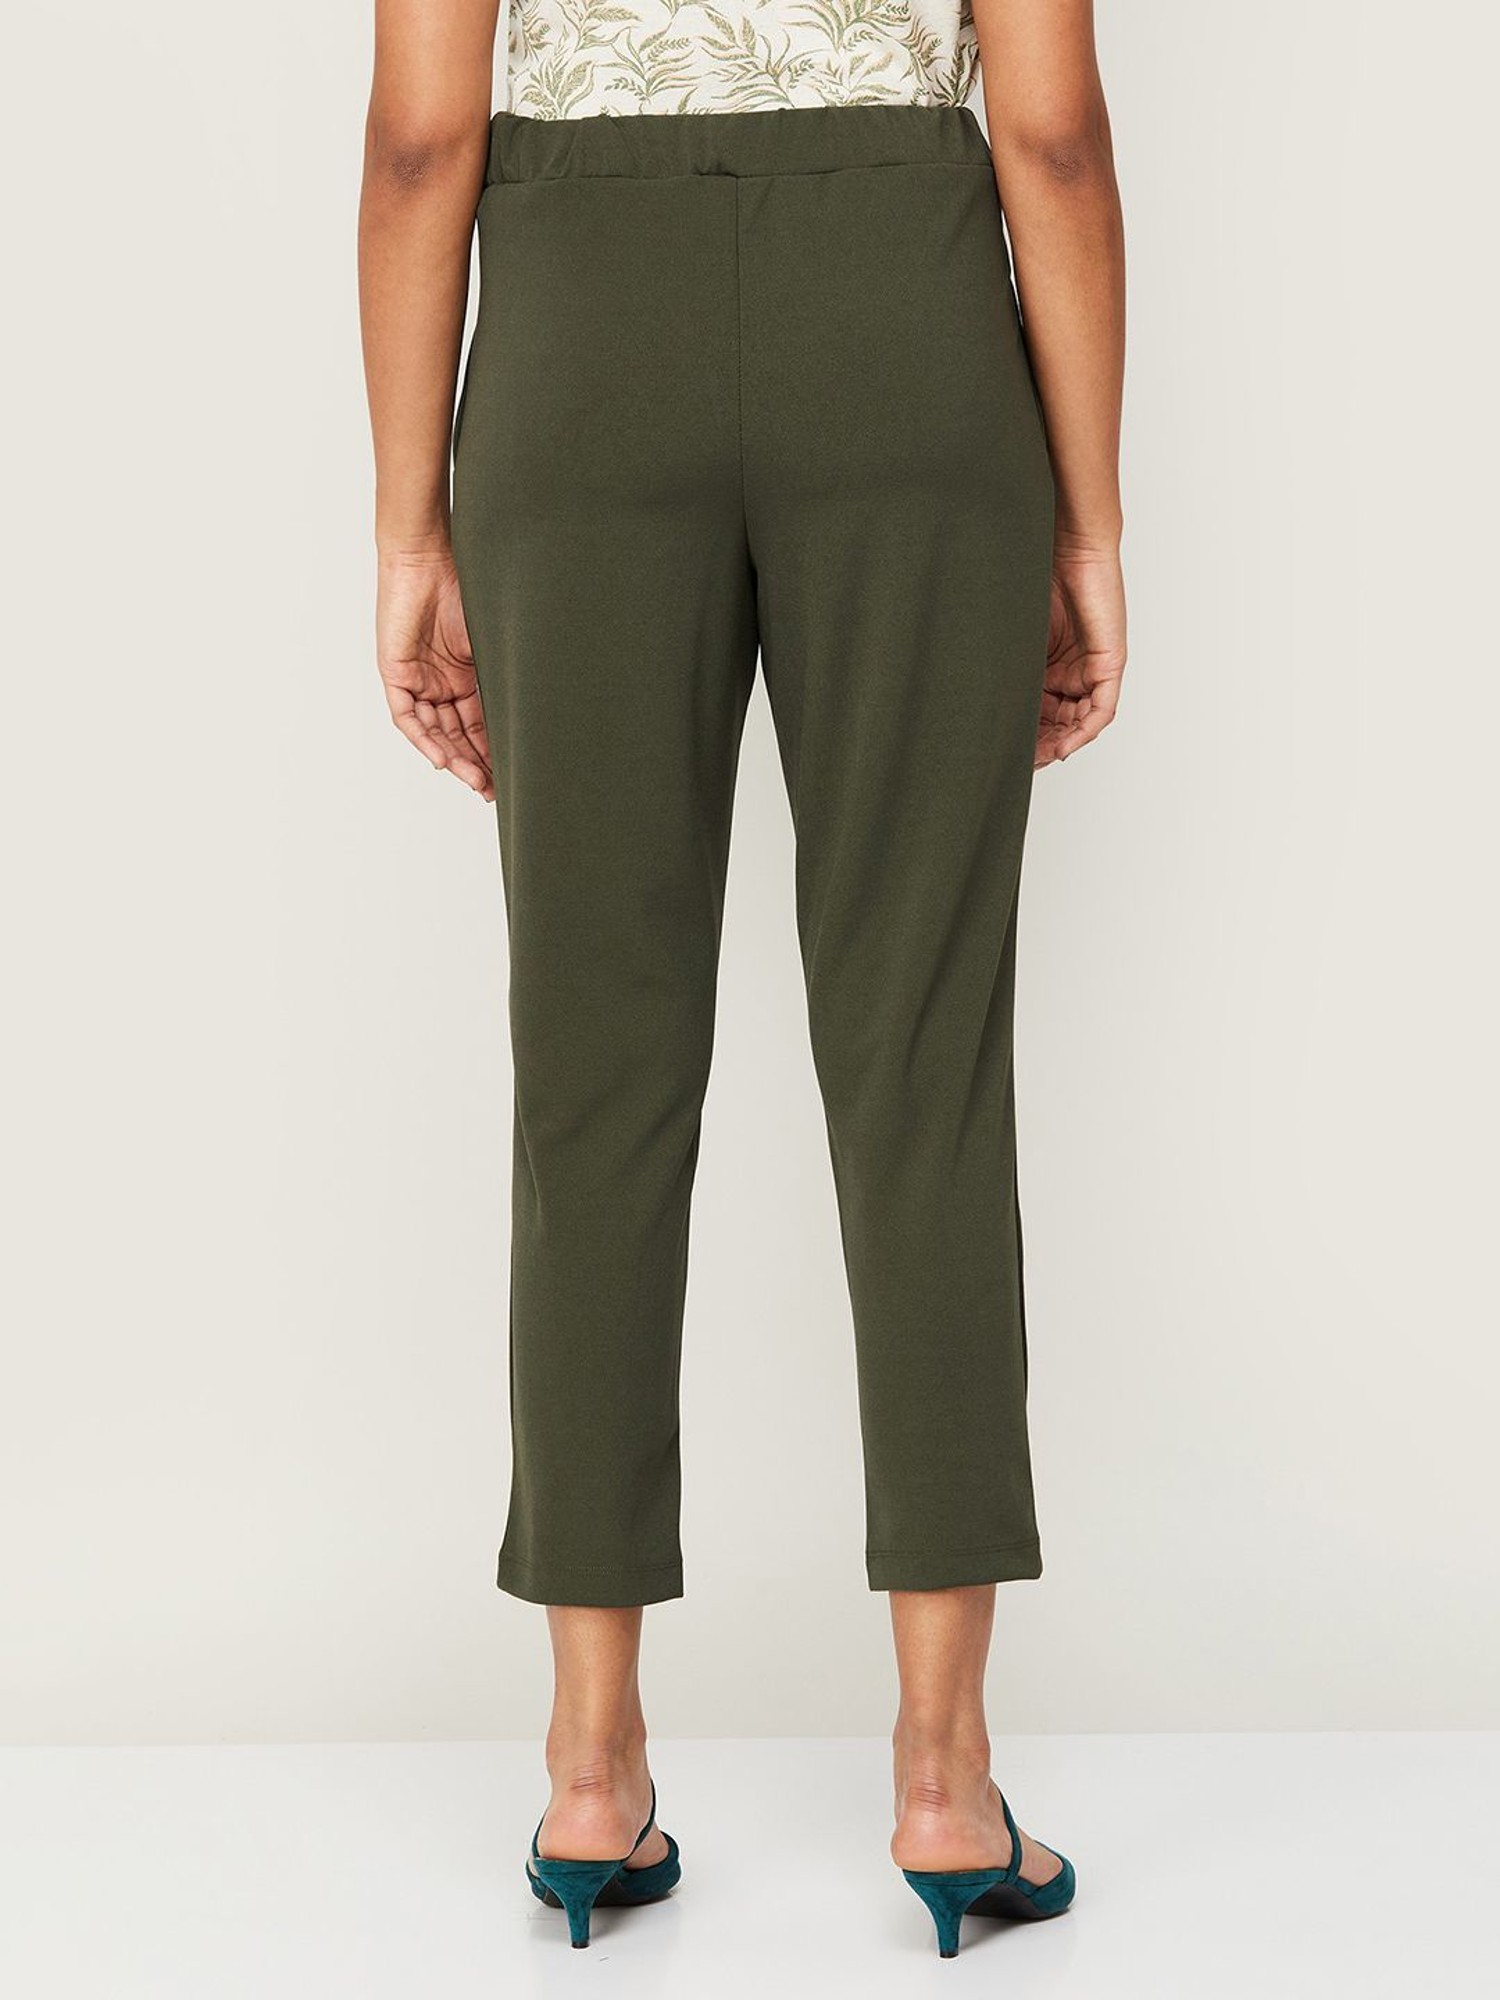 Paper bag trousers - Olive green - Ladies | H&M IN